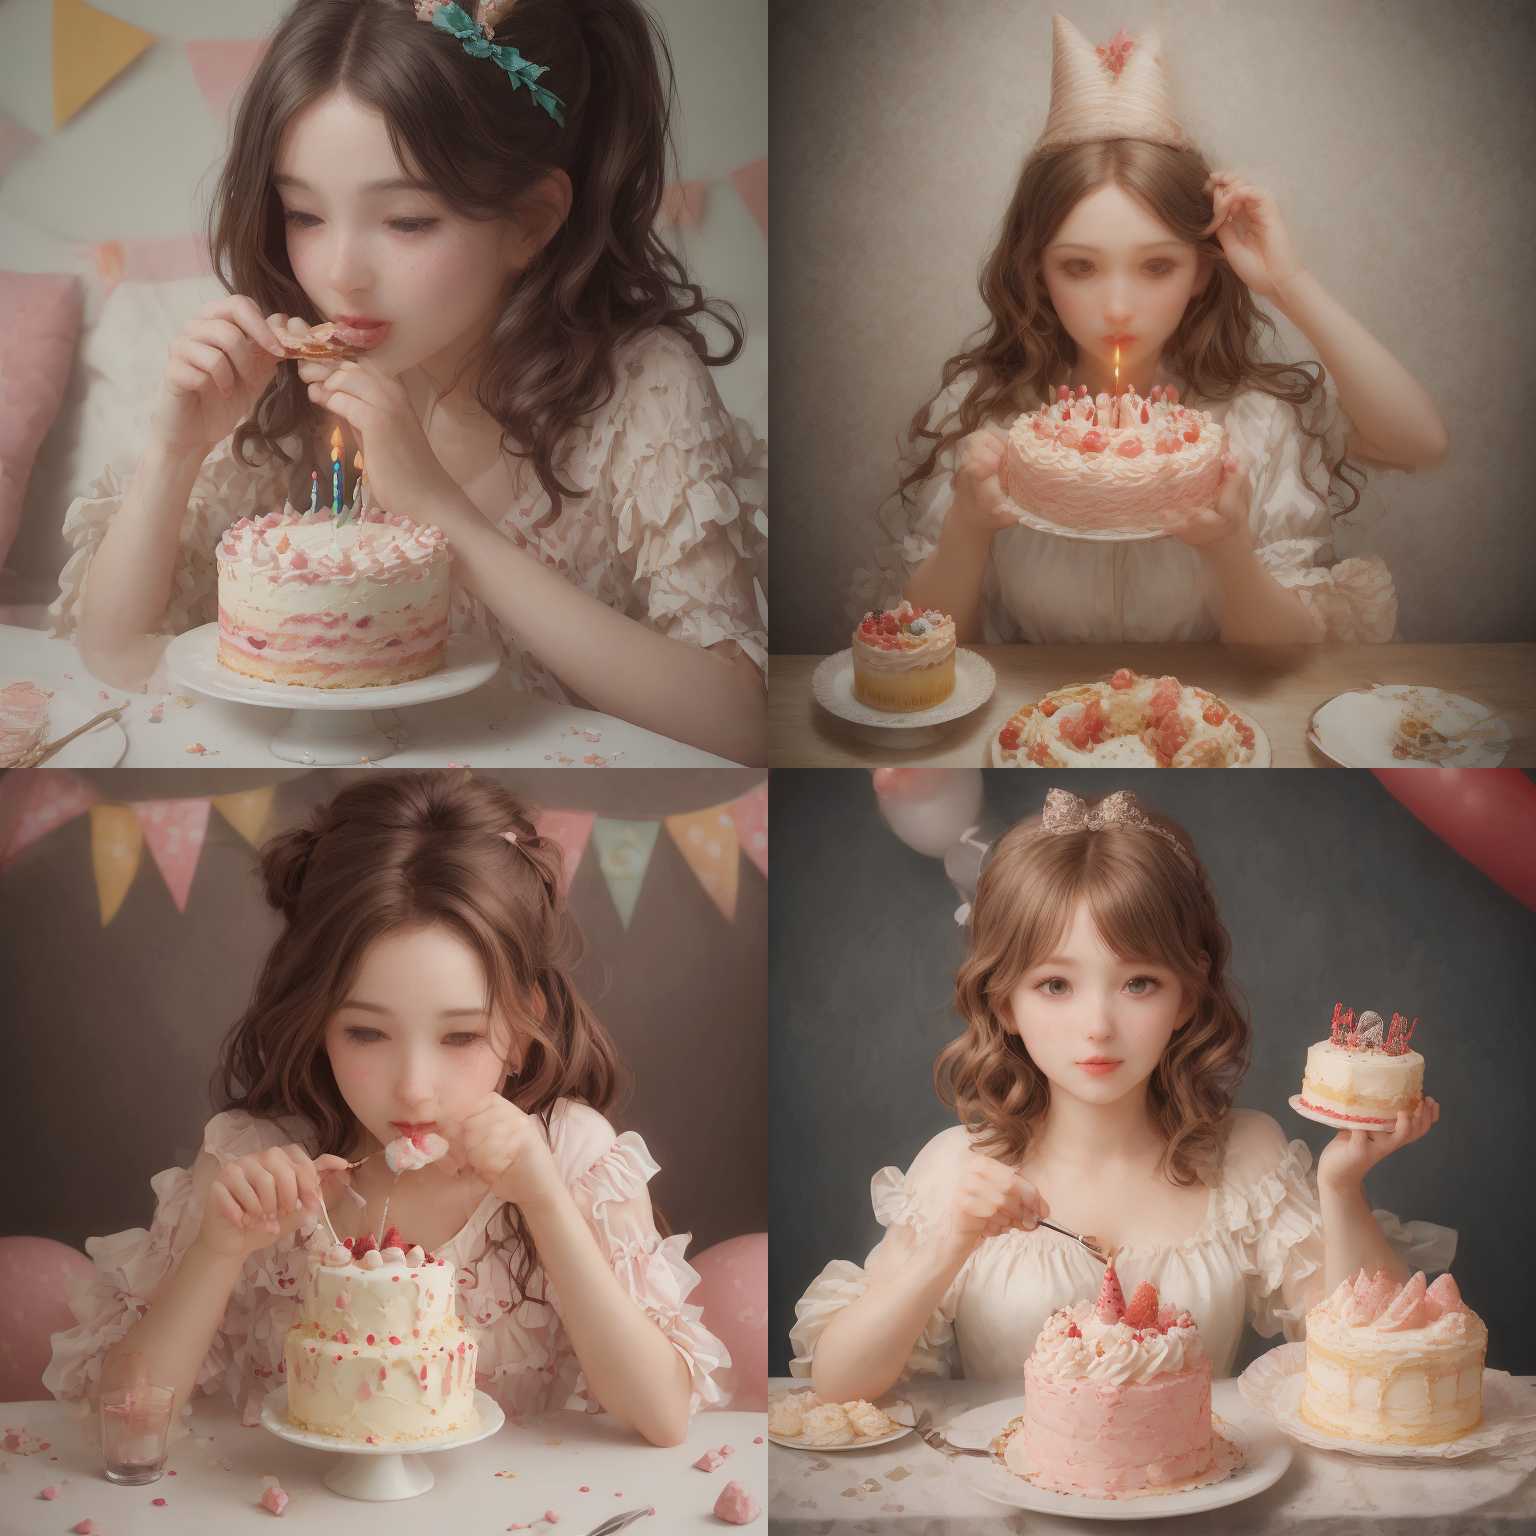 A person eating a cake on her birthday